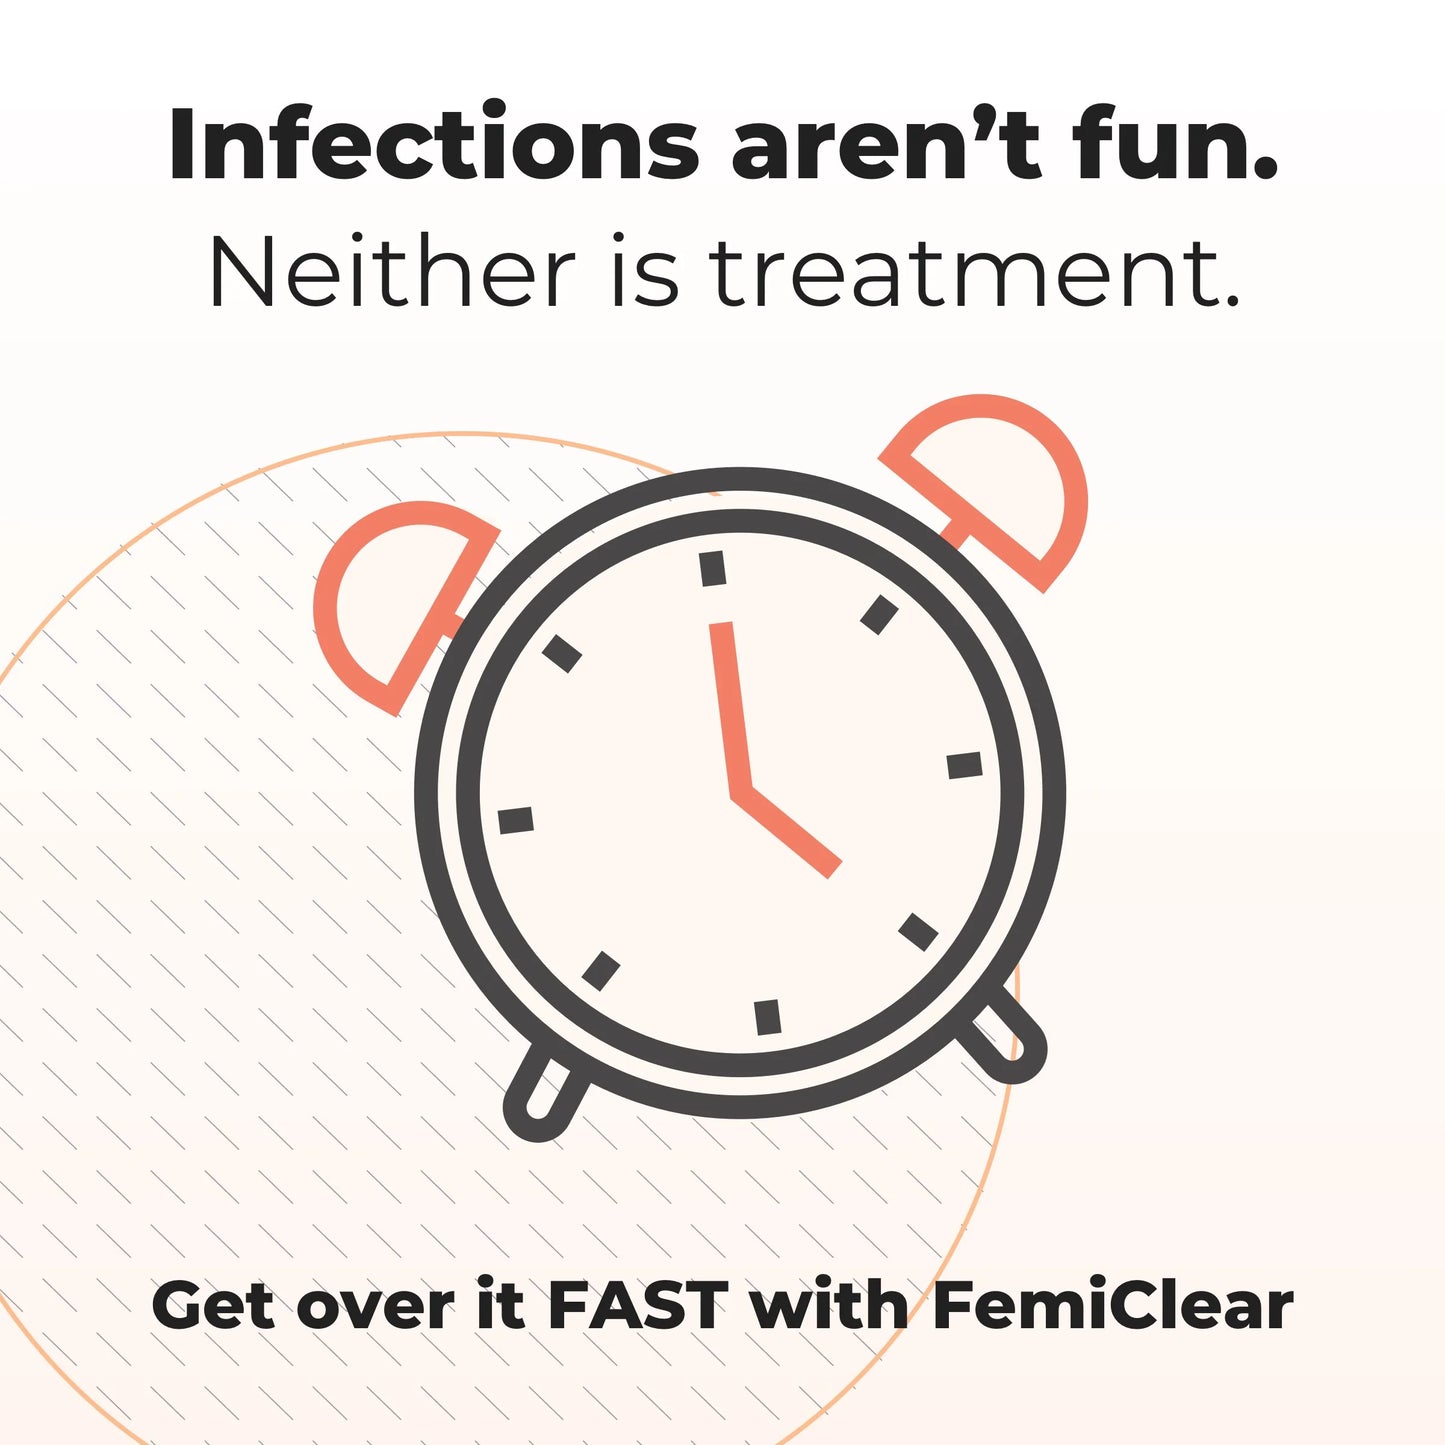 Infections aren't fun. Neither is treatment. Get over it FAST with FemiClear.